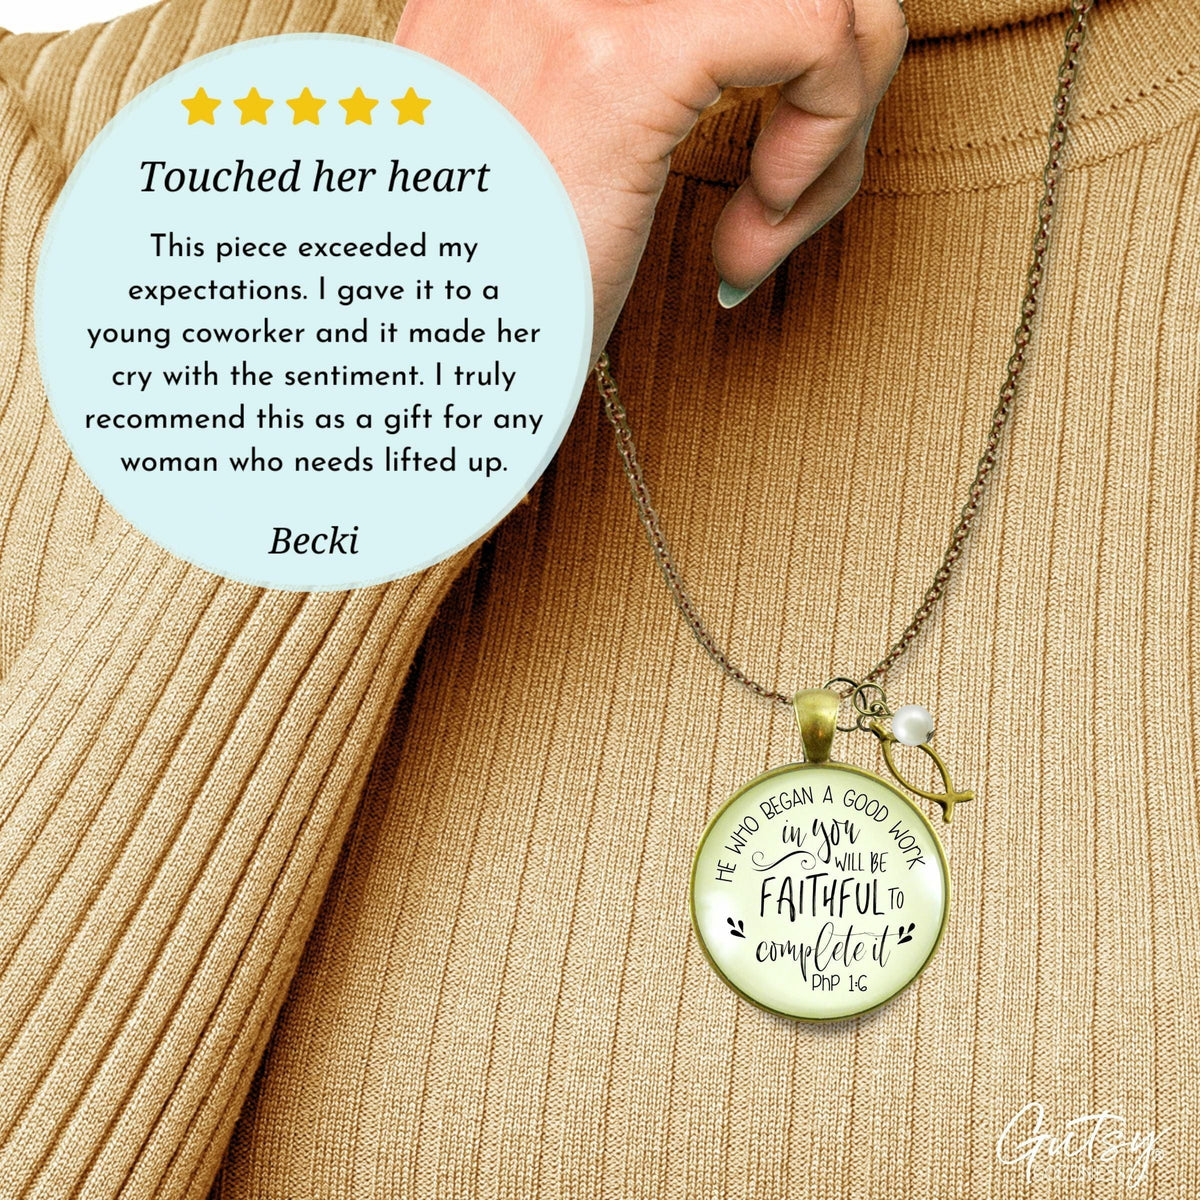 Gutsy Goodness Christian Necklace He Who Began Good Work Bible Quote Ichthys Jewelry - Gutsy Goodness Handmade Jewelry;Christian Necklace He Who Began Good Work Bible Quote Ichthys Jewelry - Gutsy Goodness Handmade Jewelry Gifts